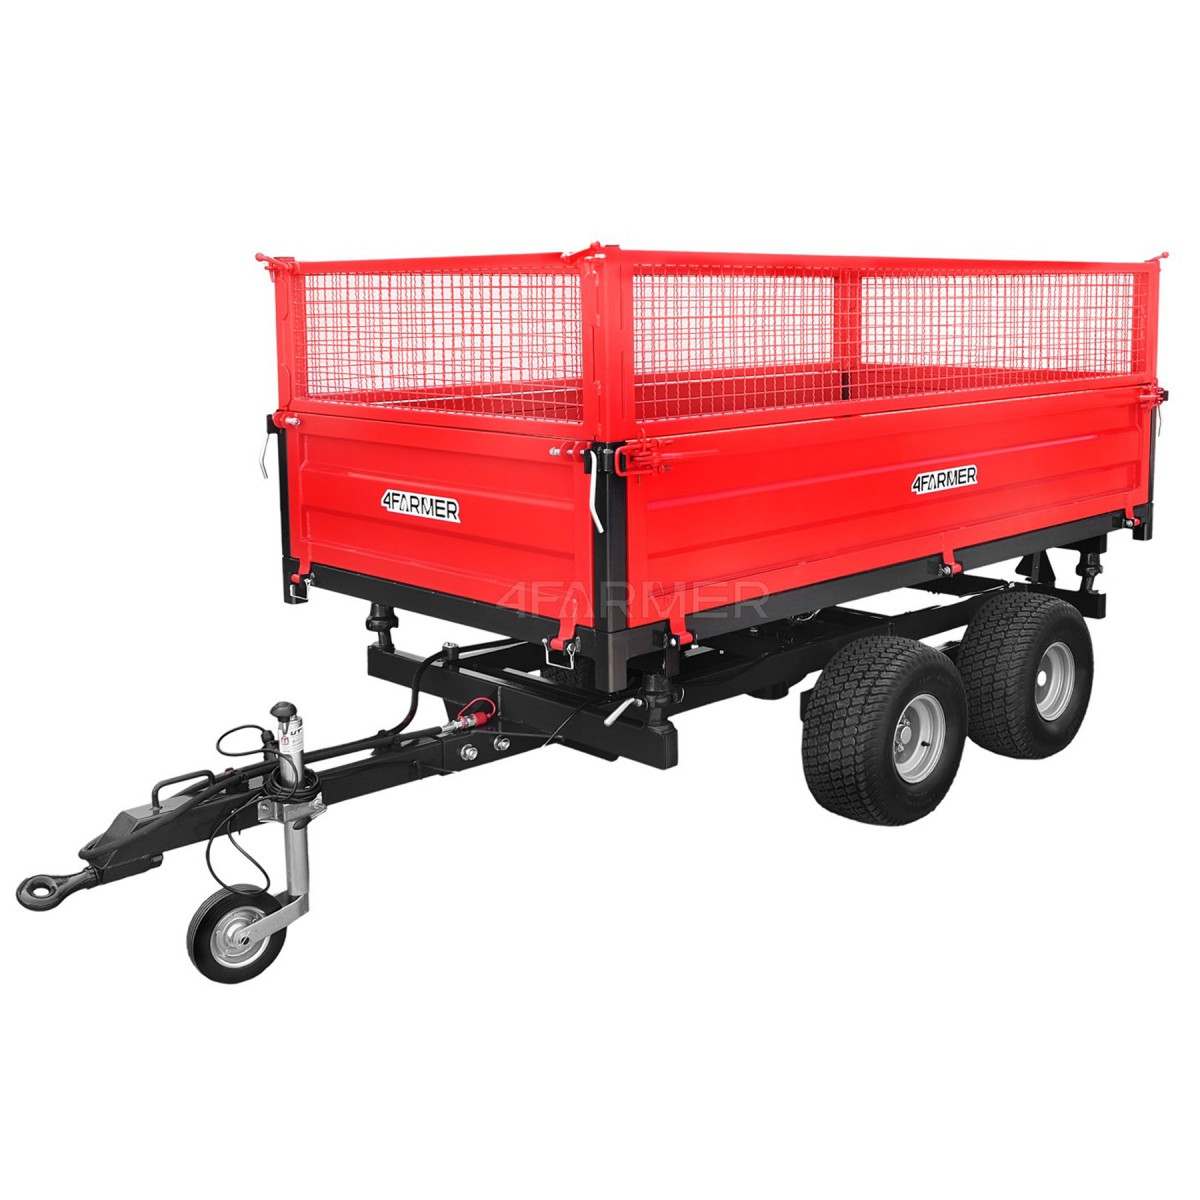 Two-axle agricultural trailer 2.5T with a tipper and 4FARMER mesh extensions